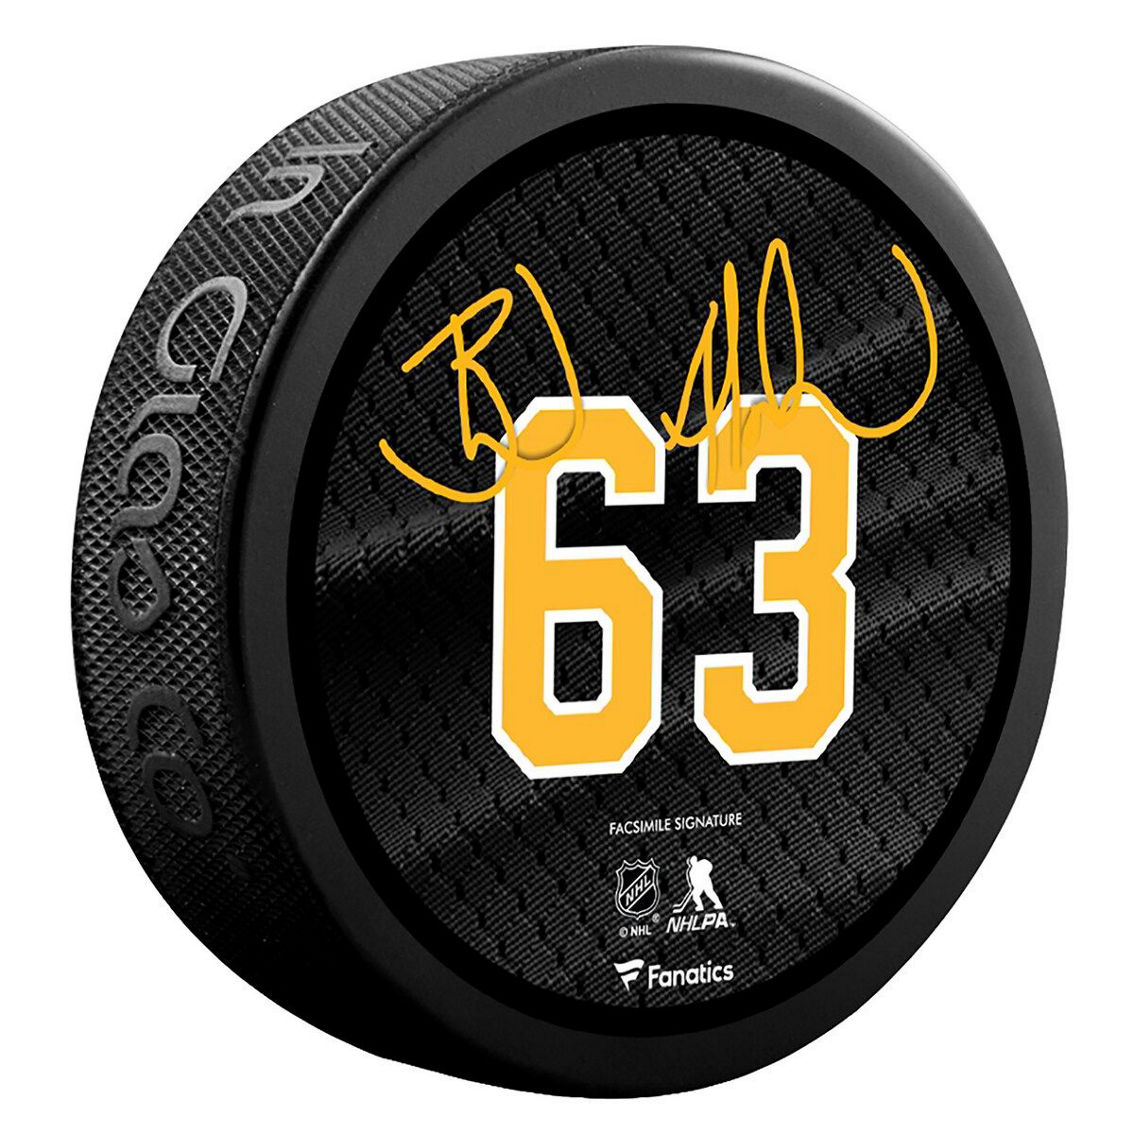 Fanatics Authentic Brad Marchand Boston Bruins Unsigned Fanatics Exclusive Player Hockey Puck - Limited Edition of 1000 - Image 3 of 4